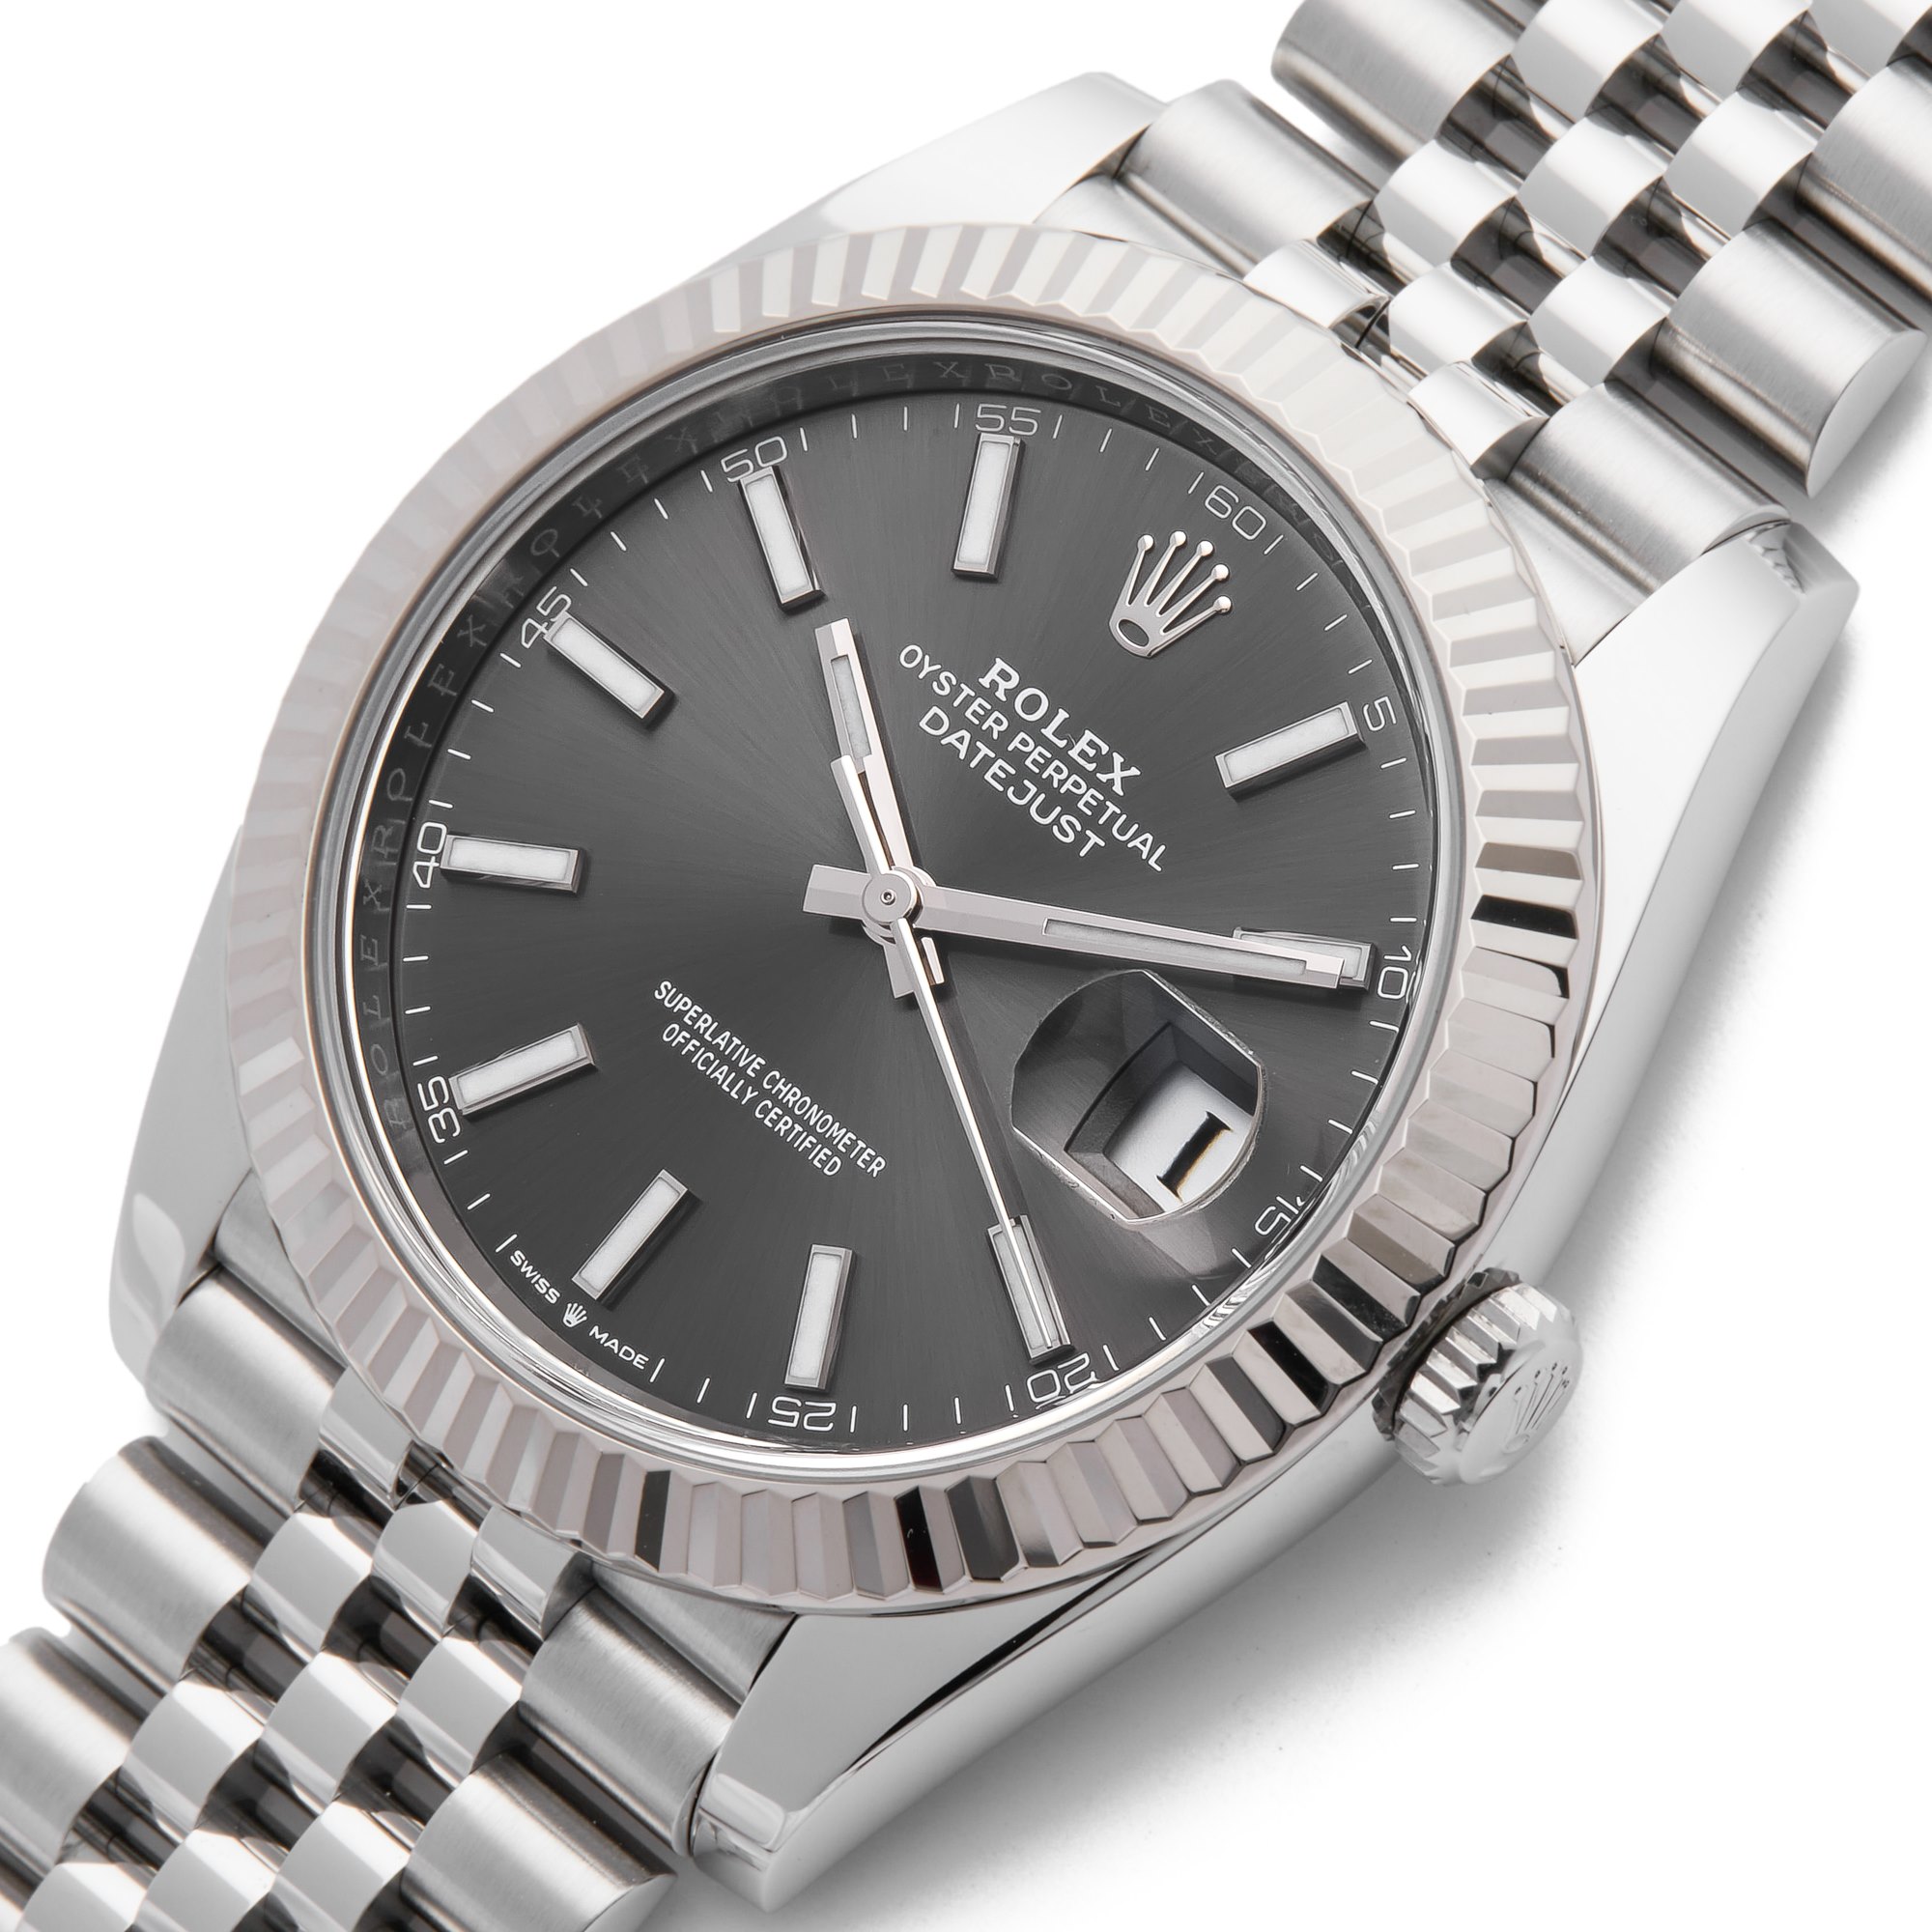 Rolex Datejust 41 White Gold & Stainless Steel 126334